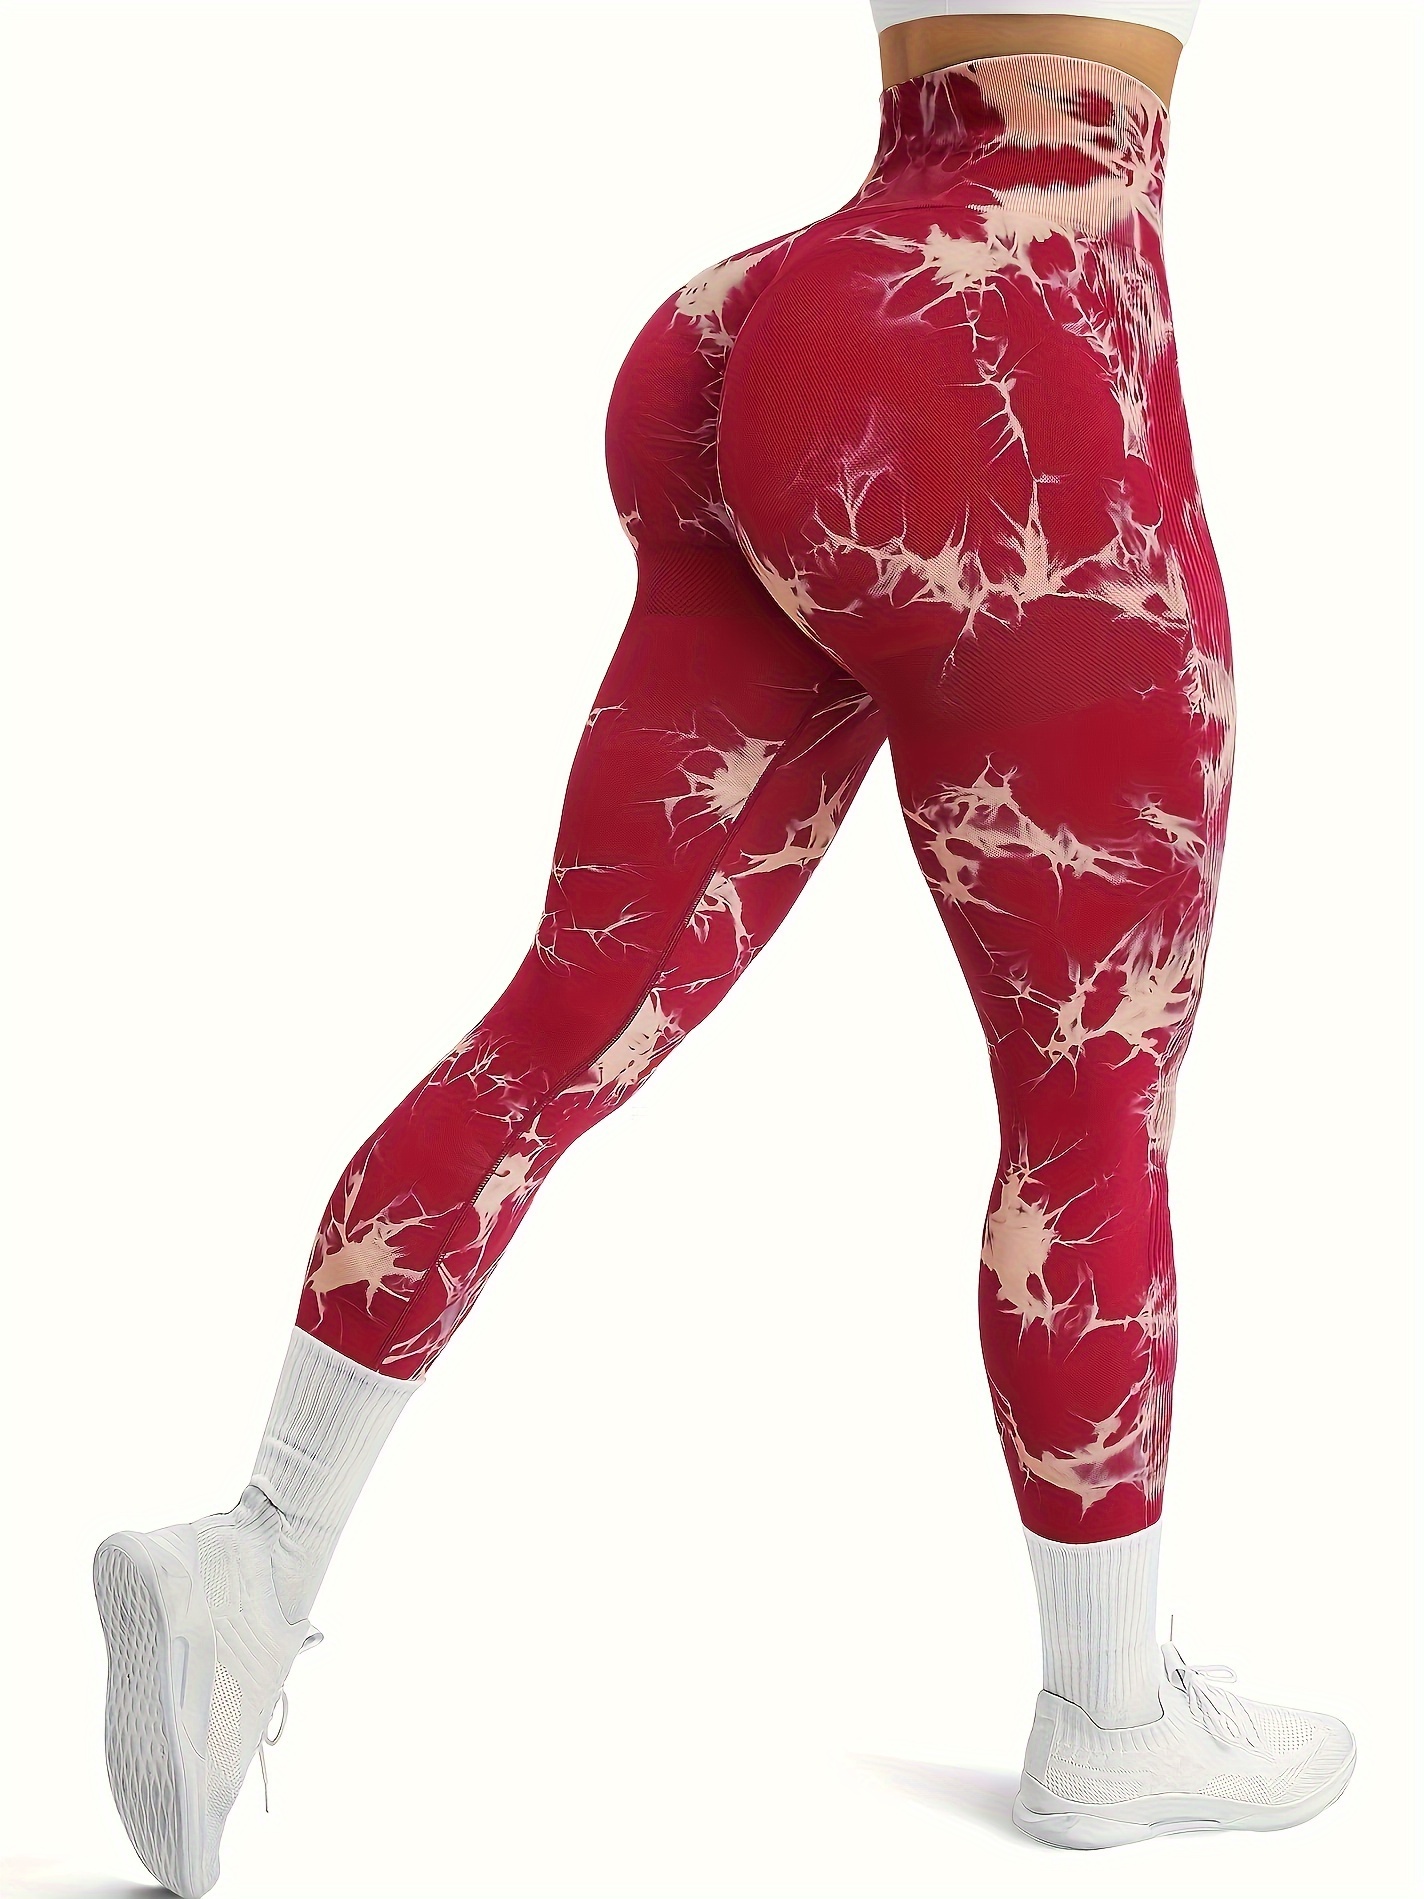 ASEIDFNSA Compression Leggings With Pockets Ladies Leggings Ladies Yoga  Leggings Cute Printed Valentine Day Casual Comfortable Leggings